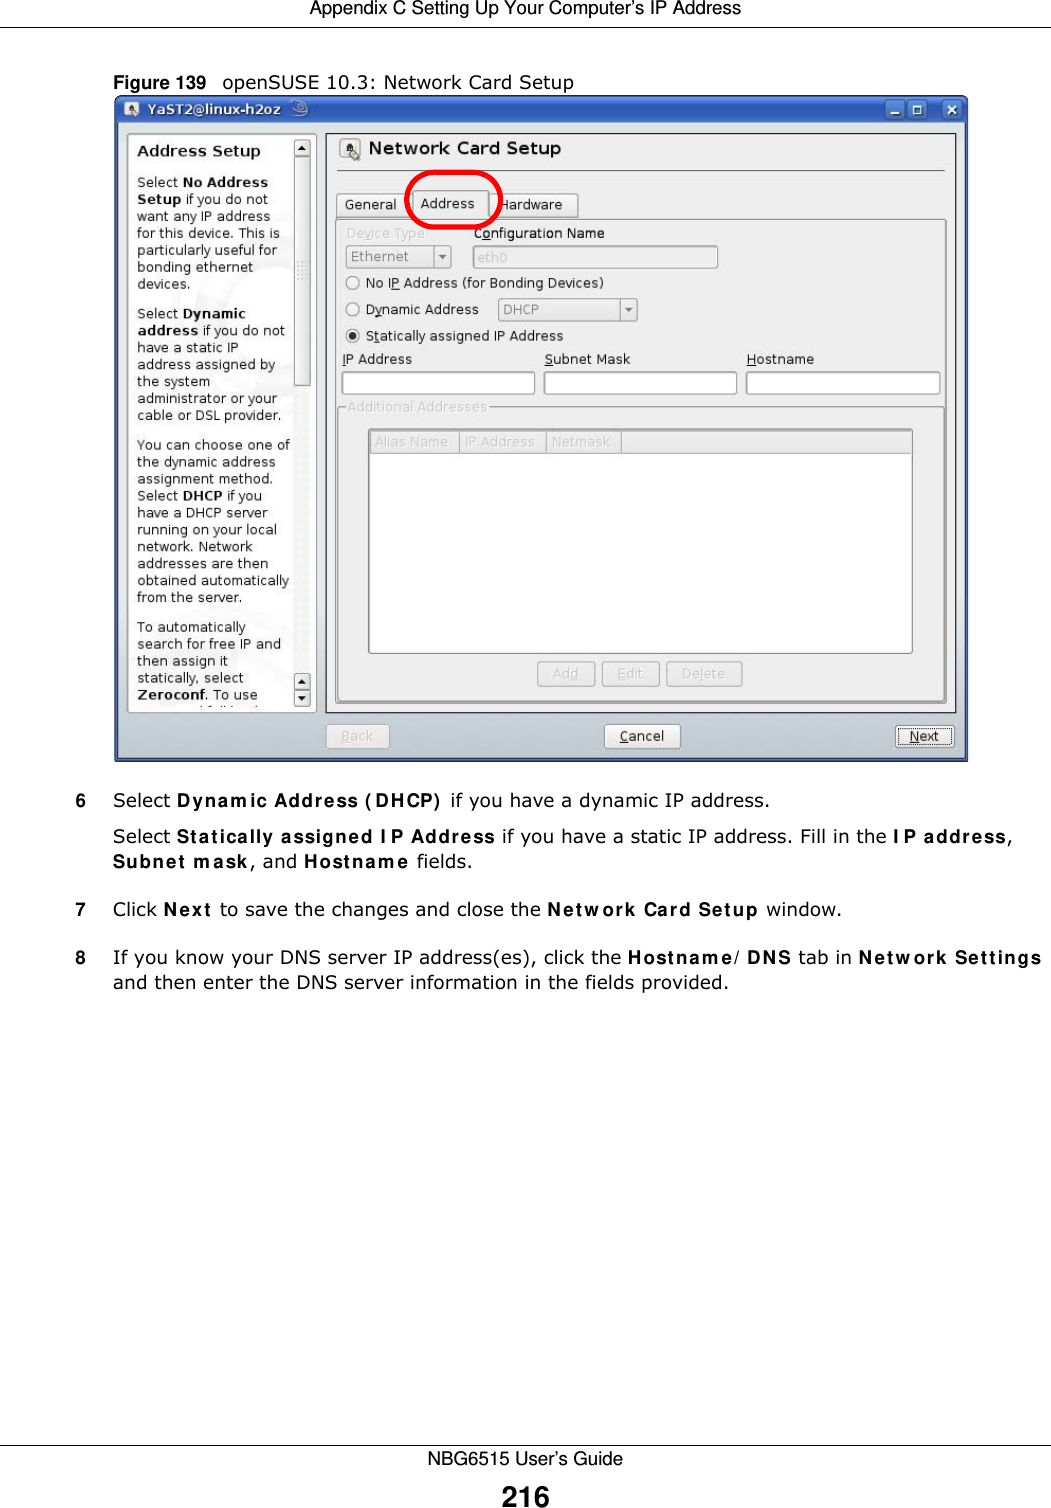 Appendix C Setting Up Your Computer’s IP AddressNBG6515 User’s Guide216Figure 139   openSUSE 10.3: Network Card Setup6Select Dyna m ic Addre ss ( D HCP)  if you have a dynamic IP address.Select St a t ically a ssigne d I P Addr e ss if you have a static IP address. Fill in the I P a ddr ess, Subne t  m ask , and H ost na m e fields.7Click N e x t  to save the changes and close the N e t w ork  Ca rd Set up window. 8If you know your DNS server IP address(es), click the H ost n am e / D N S tab in N et w or k Set t ings and then enter the DNS server information in the fields provided.